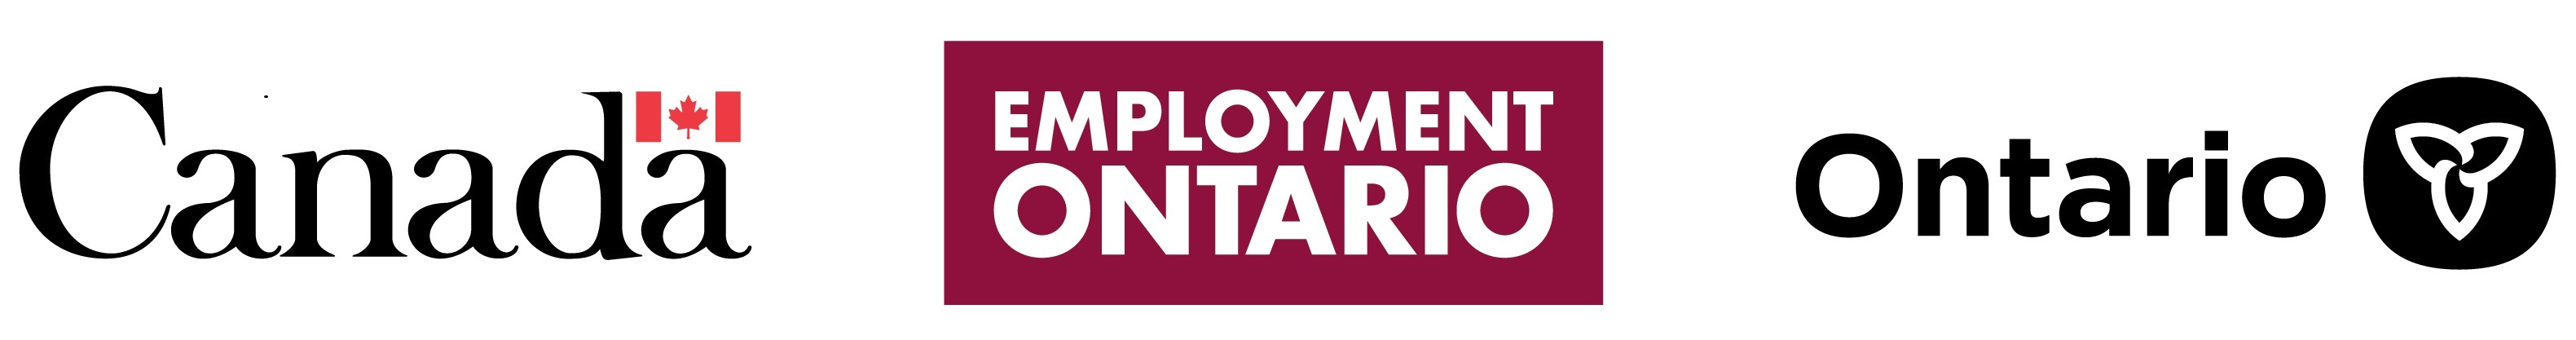 Logos of the Government of Canada, Employment Ontario and the Government of Ontario